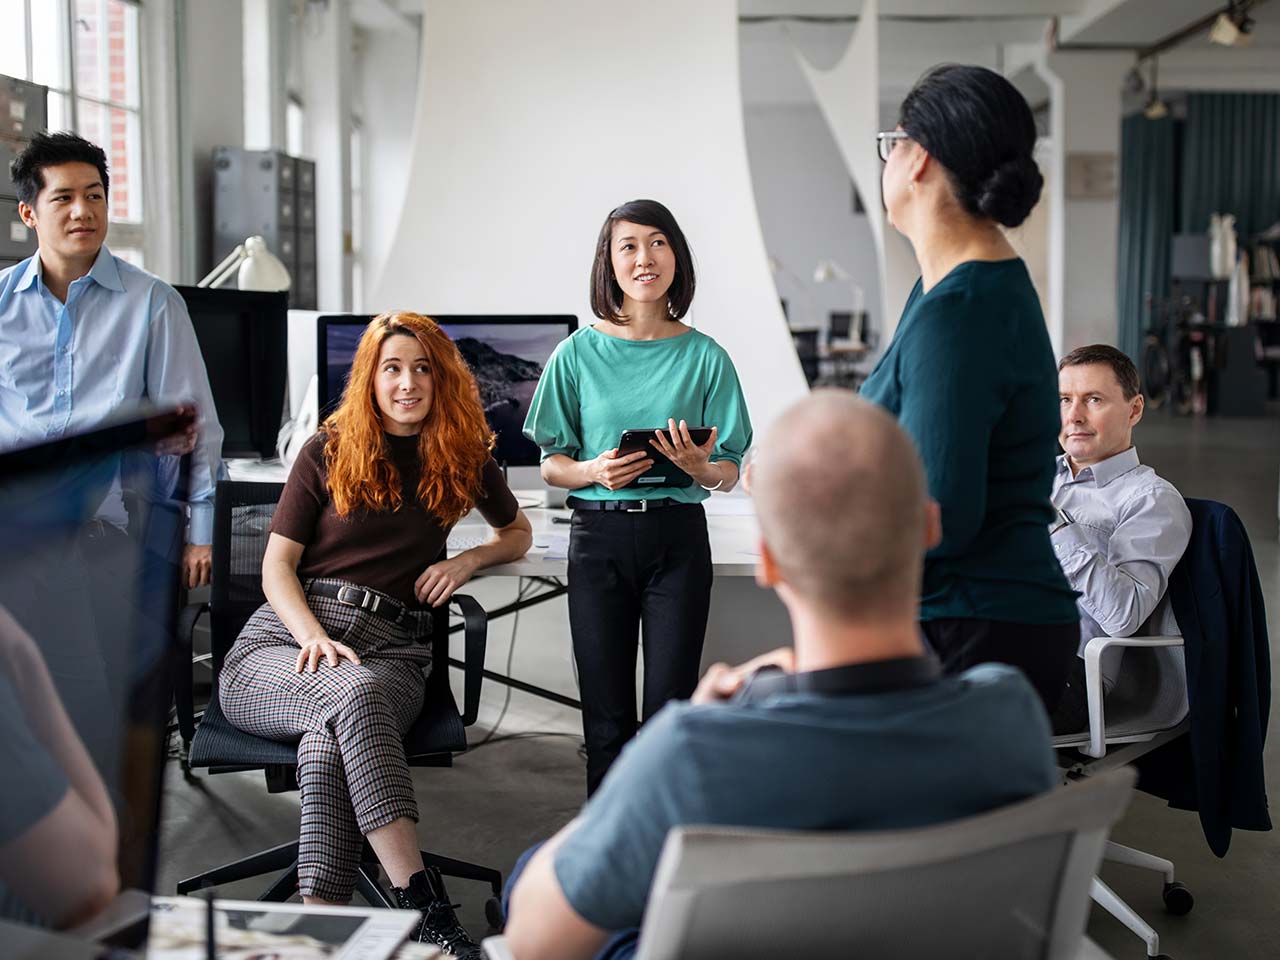 Team of people in an office having a discussion.